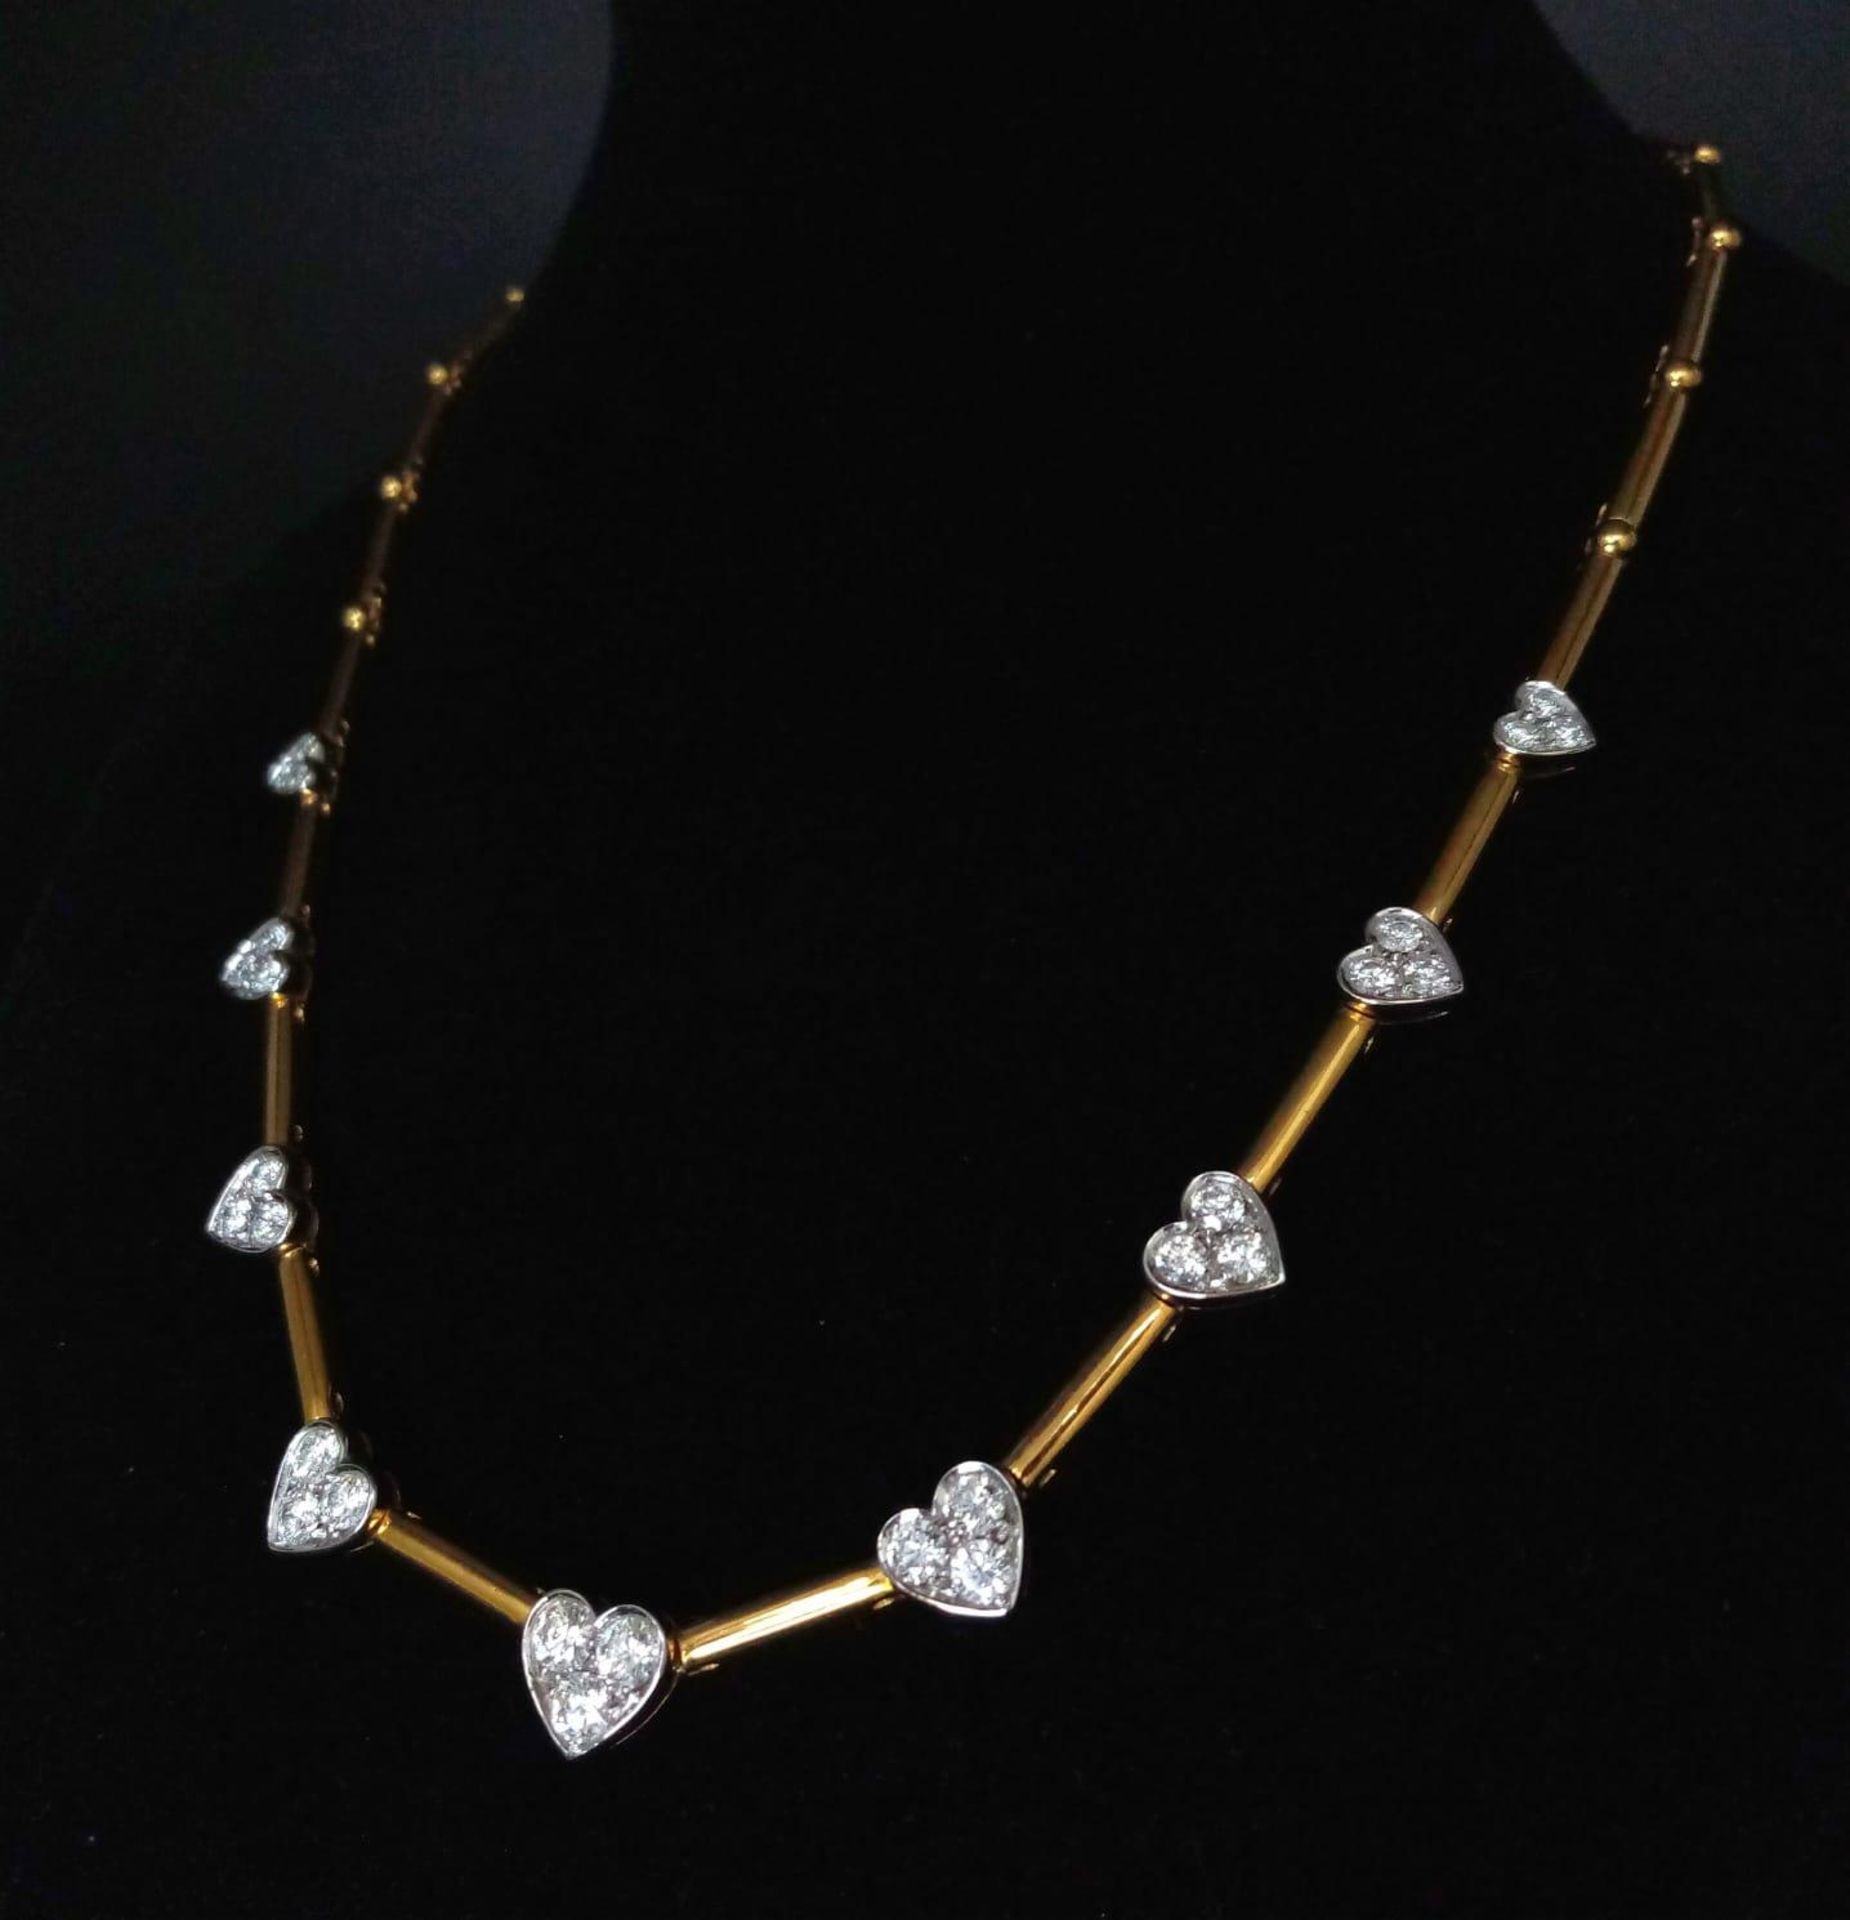 A Gorgeous 18K Gold and Heart-Diamond Necklace and Bracelet Set. The necklace is decorated with - Image 12 of 21